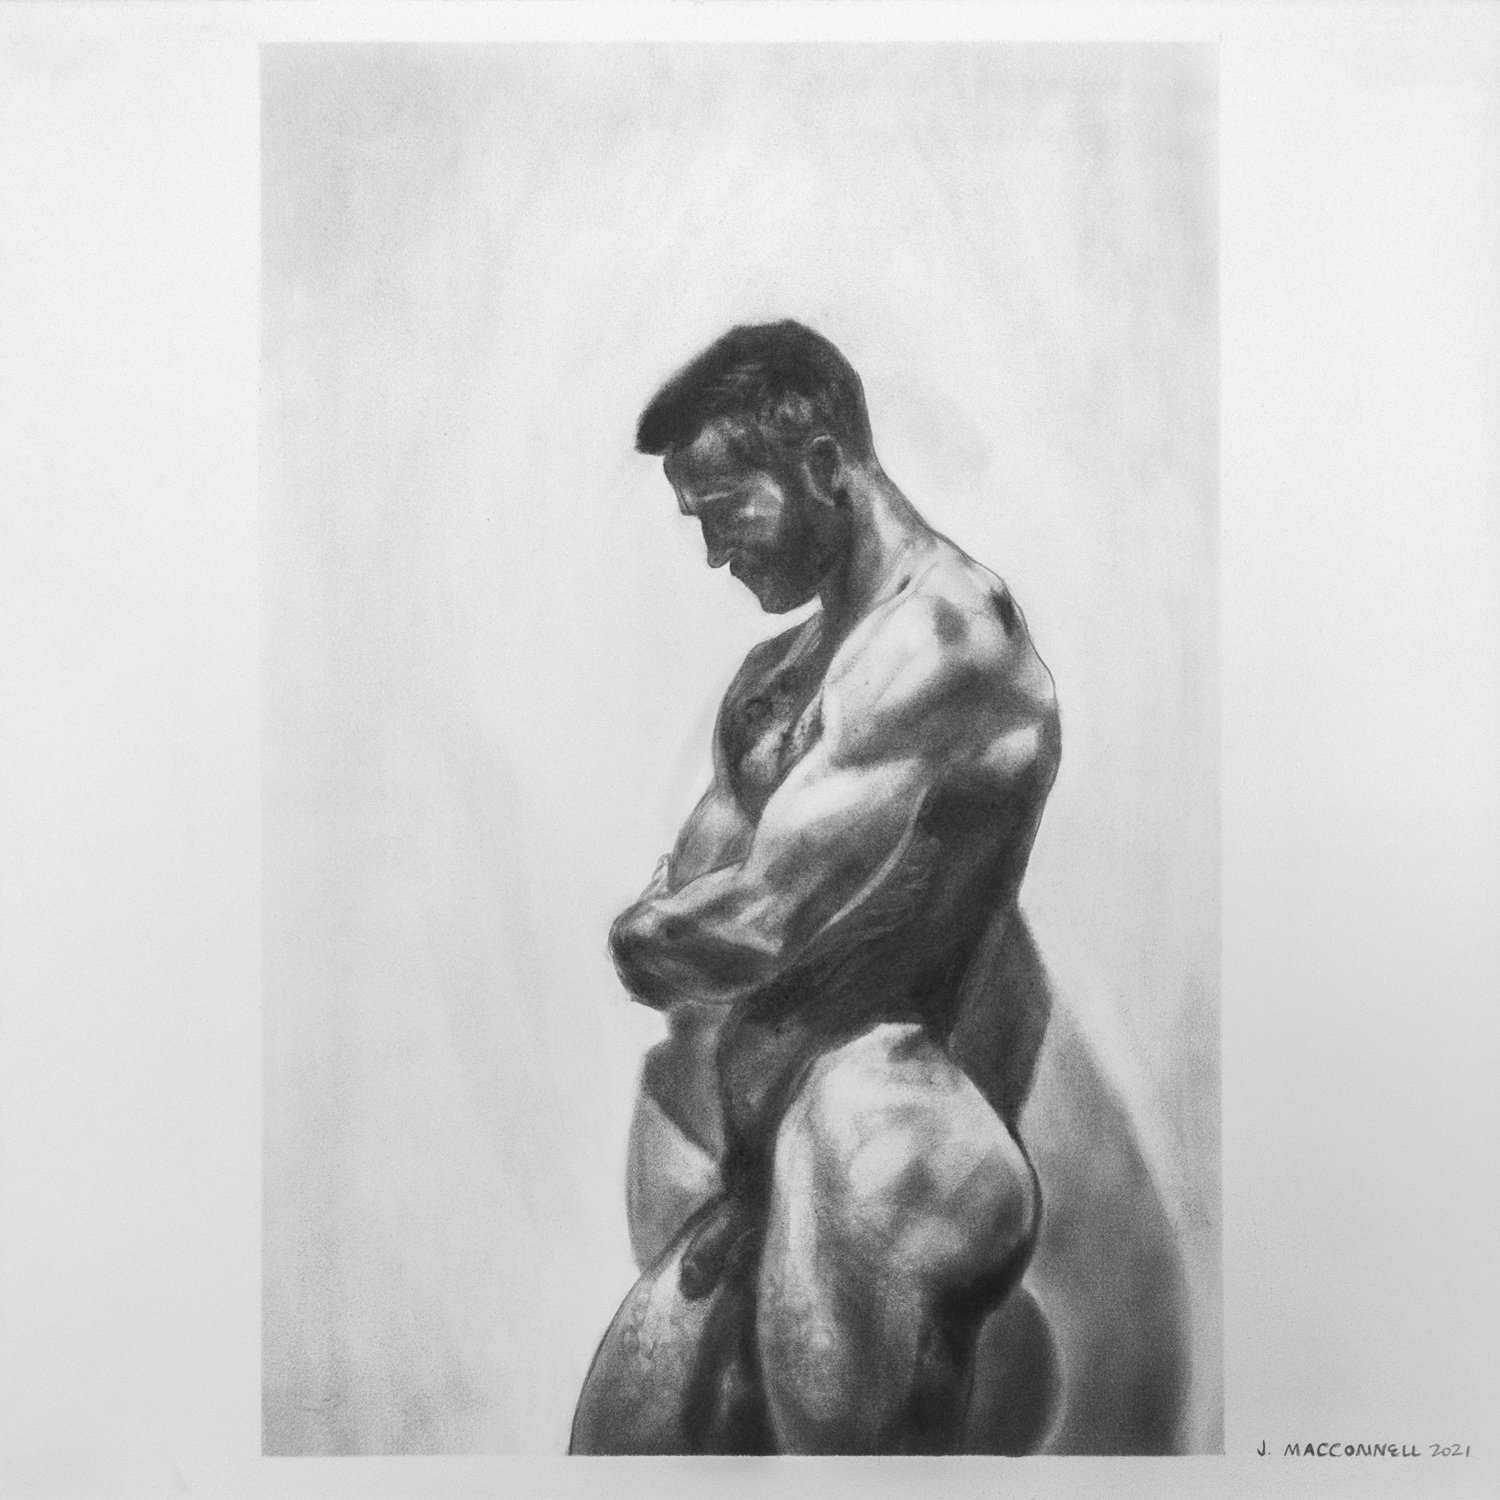   John MacConnell,  Levi , 2021, graphite on Rives BFK, 22.25”x22.25”   Inquire  